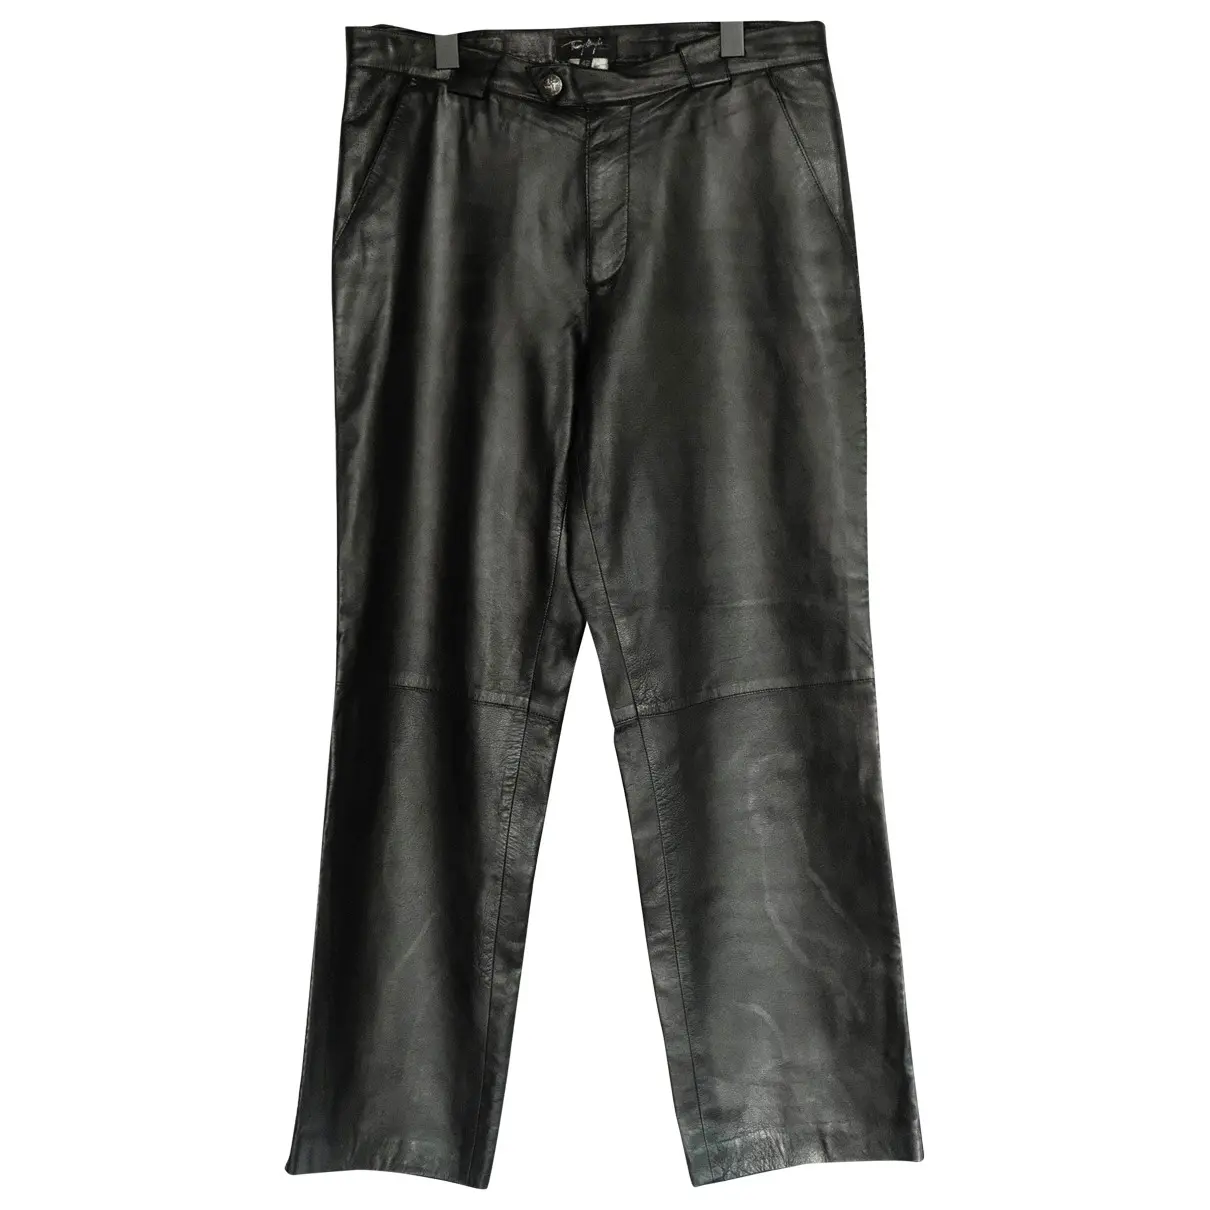 Leather straight pants Thierry Mugler - Vintage